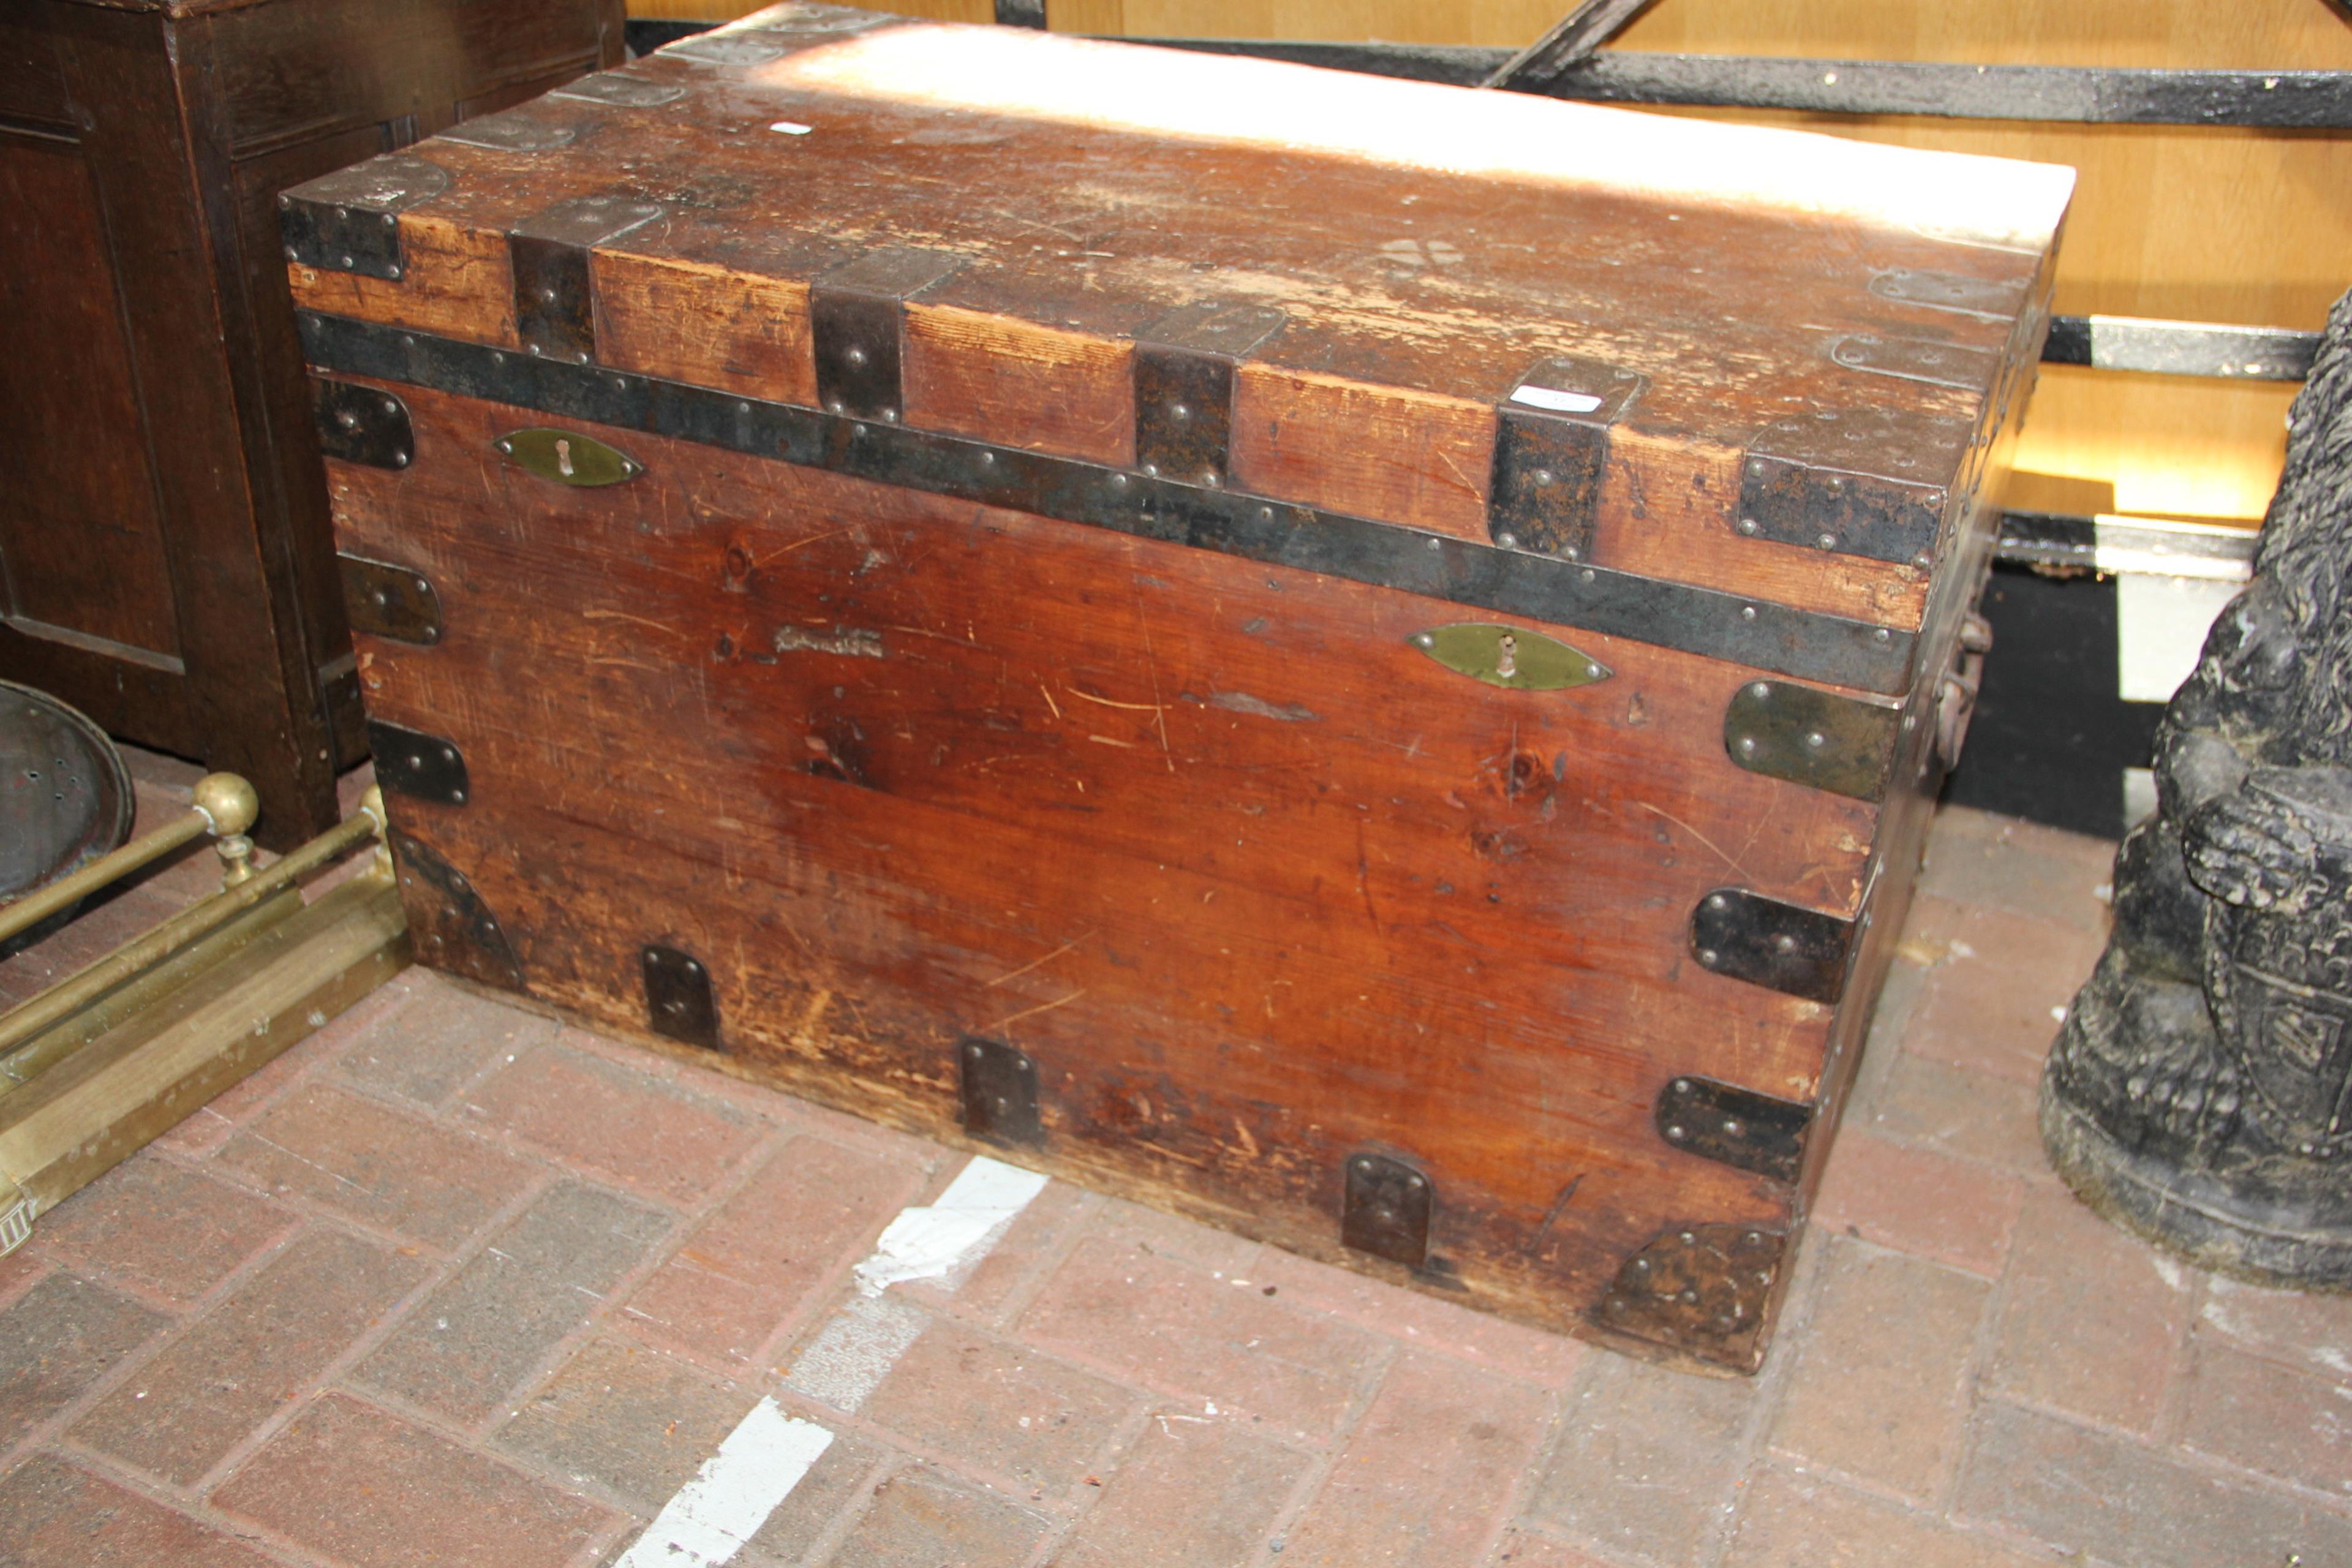 An antique chest with metal mounts